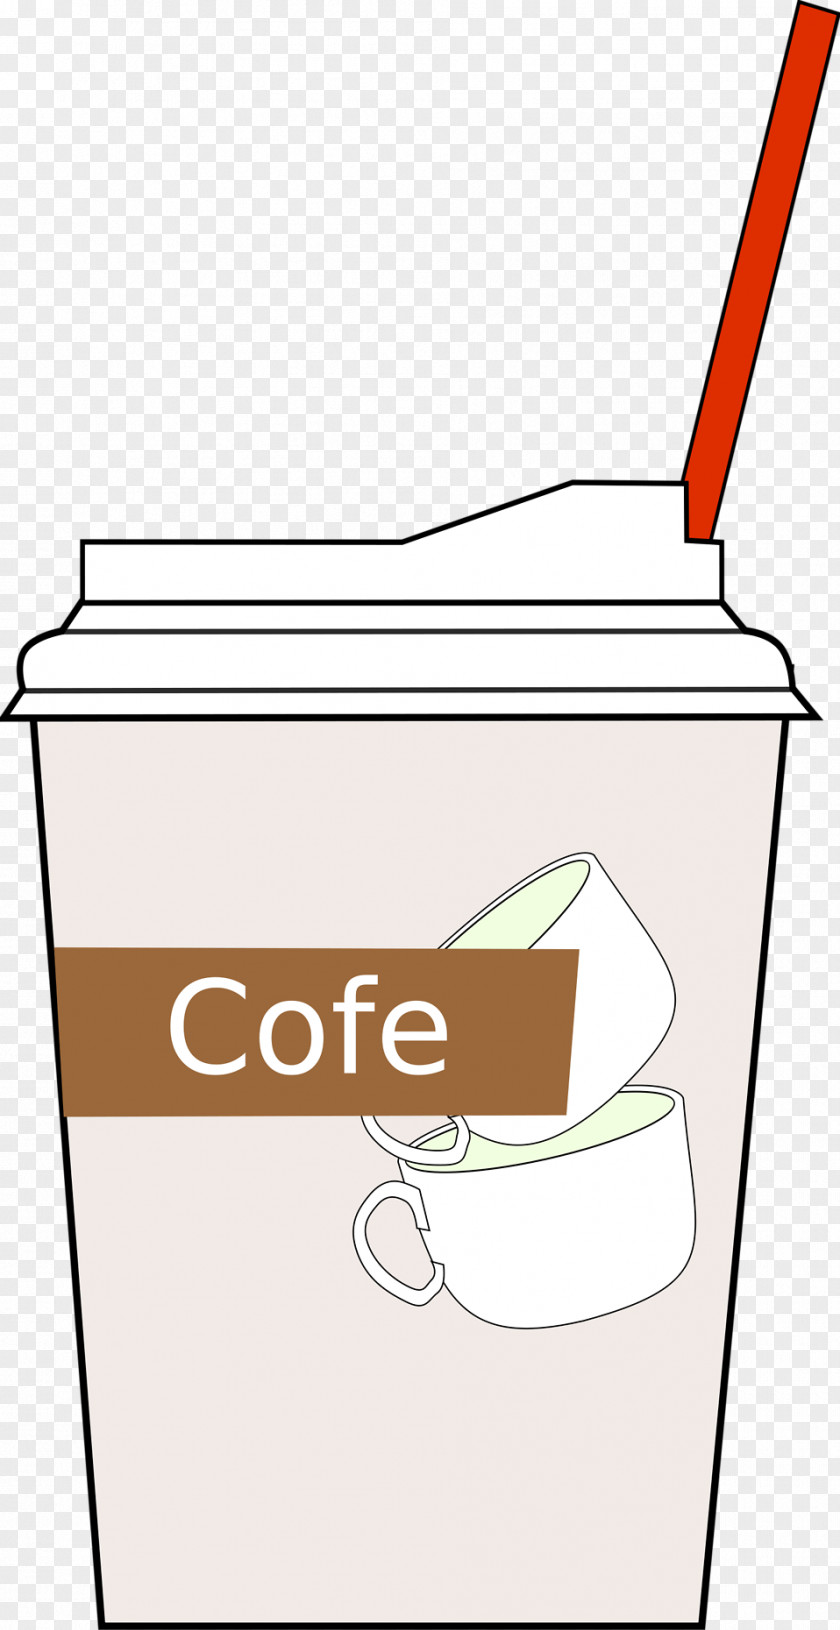 Coffee Cafe Iced Cup Clip Art PNG